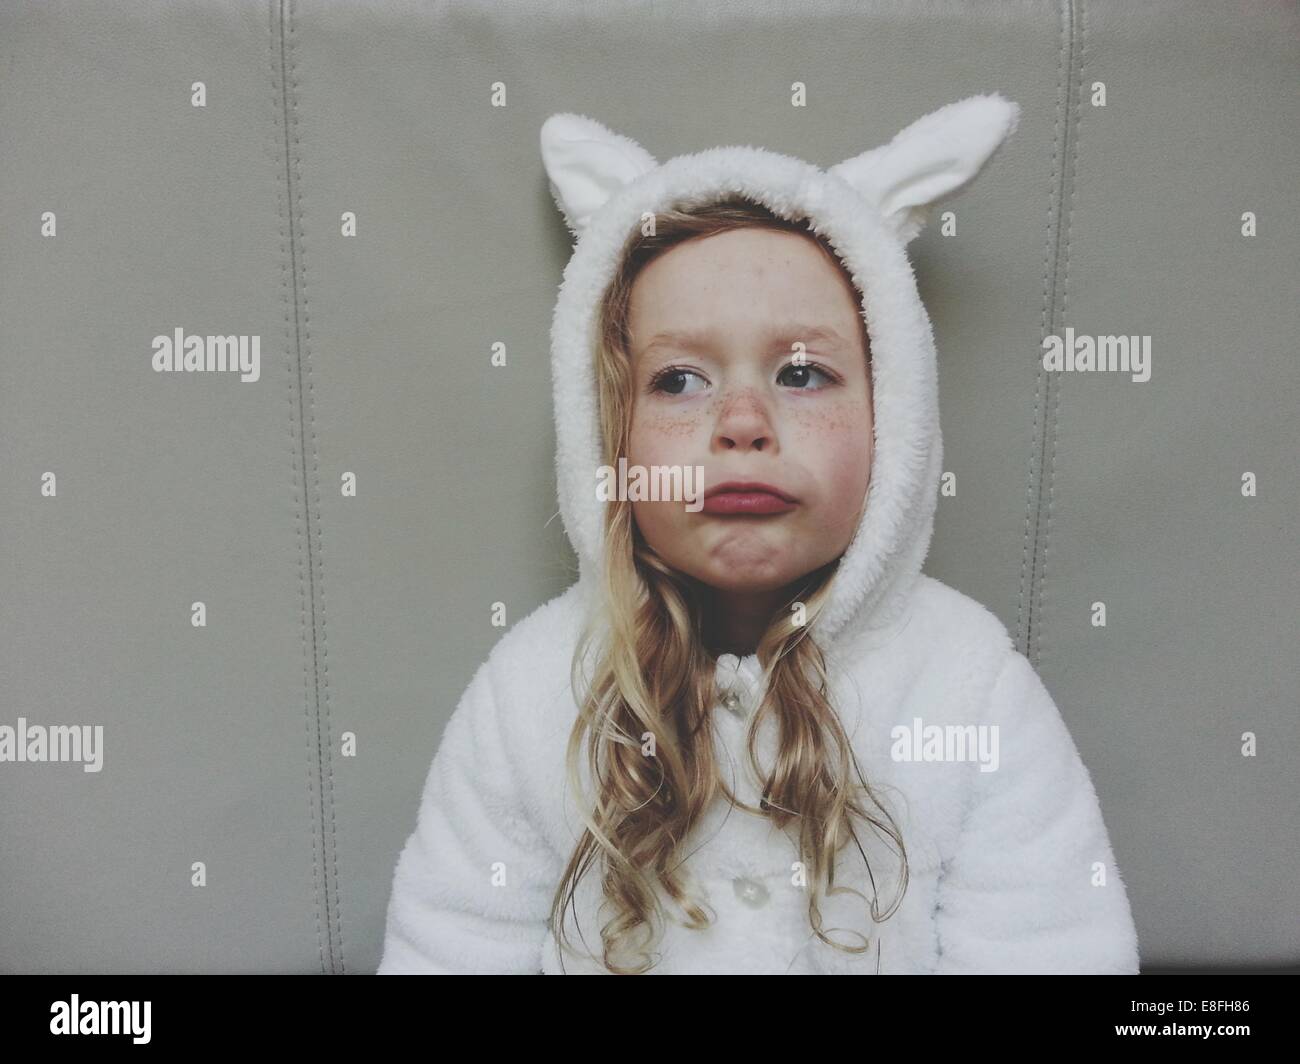 Girl in bunny rabbit costume pulling funny faces Stock Photo